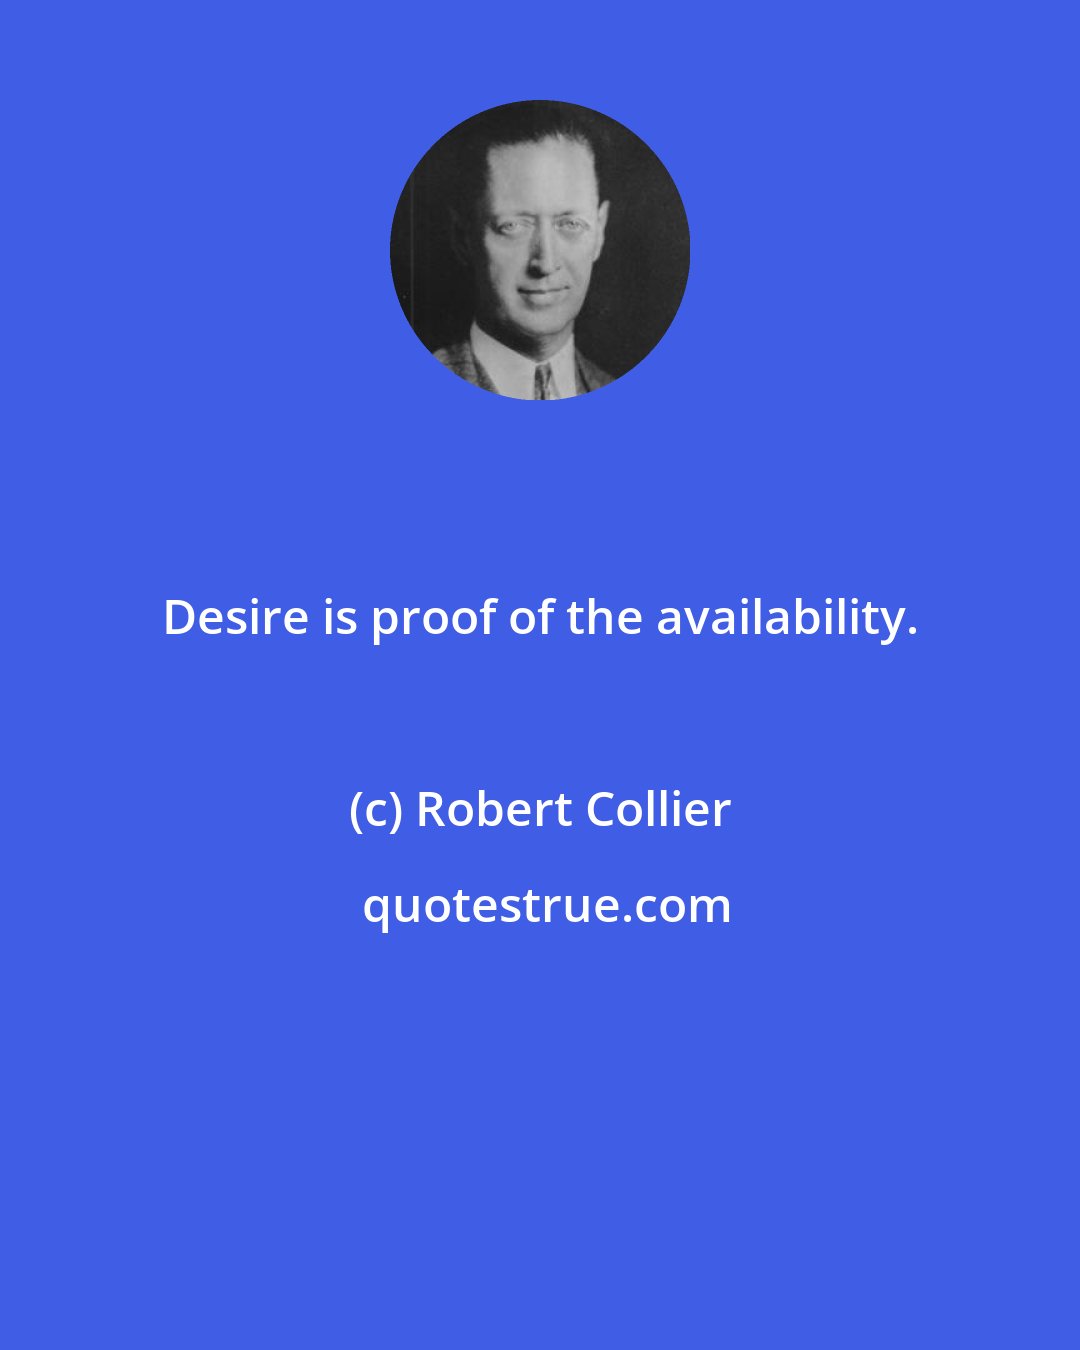 Robert Collier: Desire is proof of the availability.